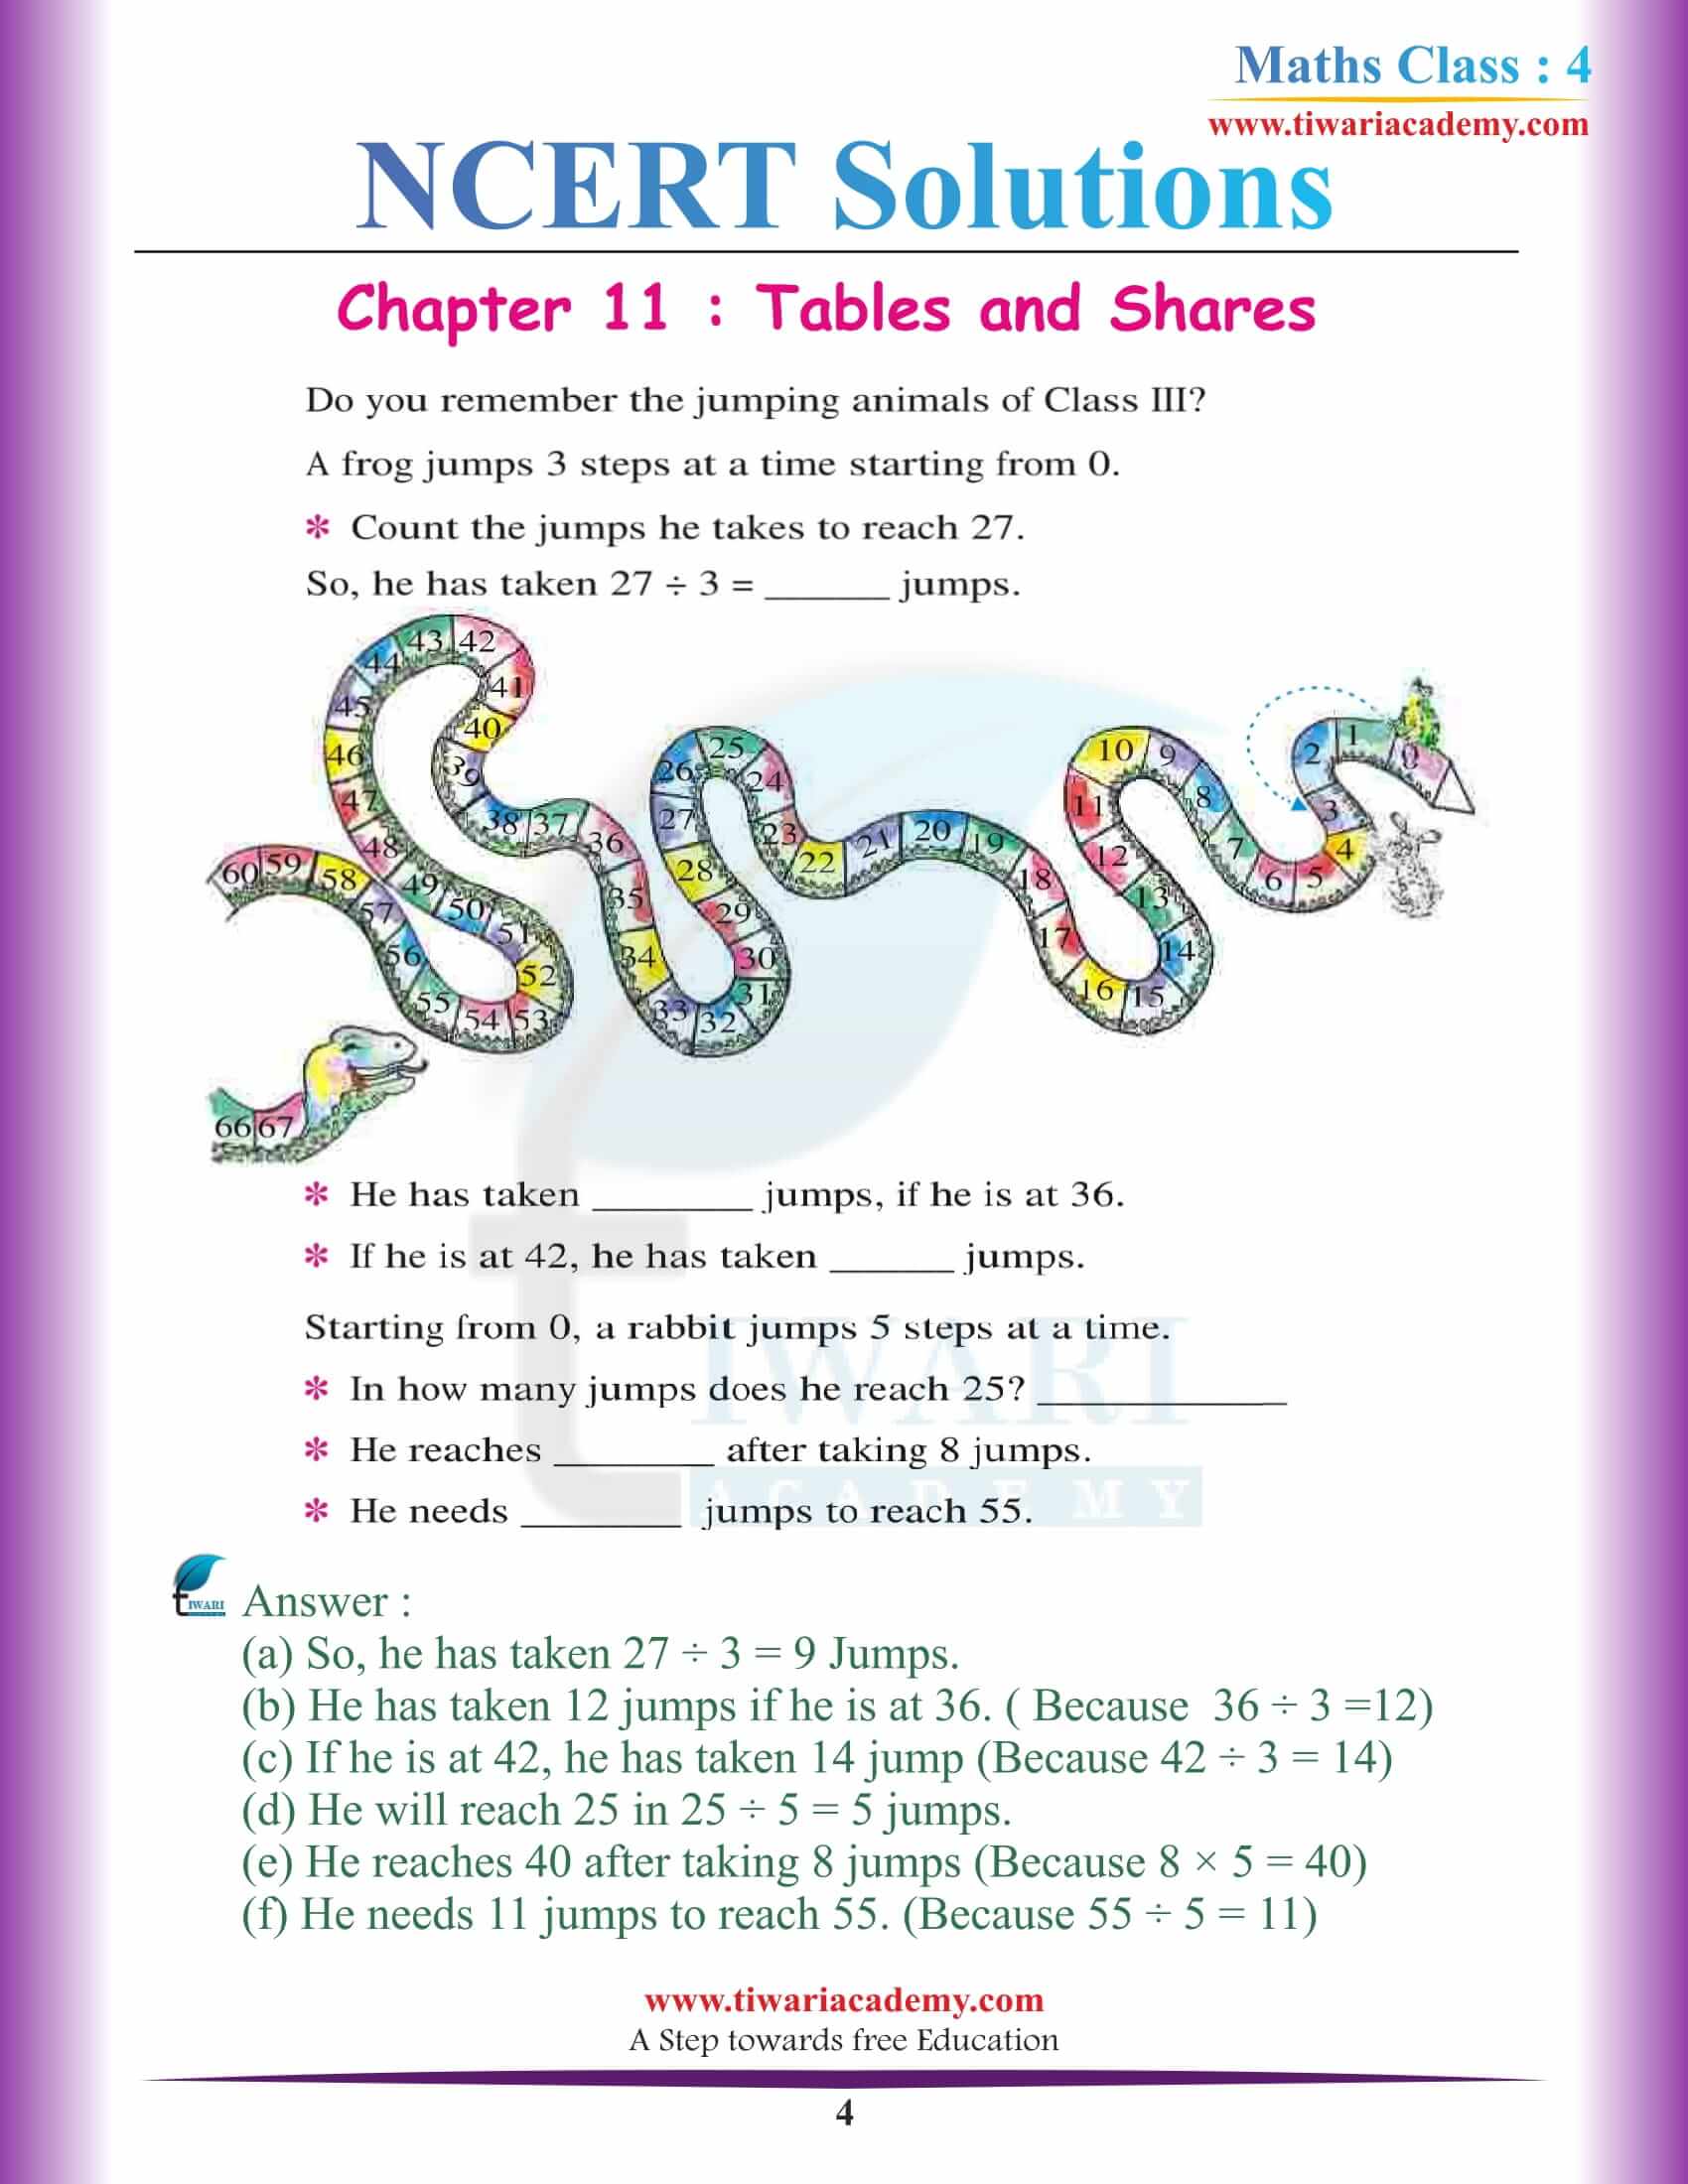 NCERT Solutions for Class 4 Maths Chapter 11 free download